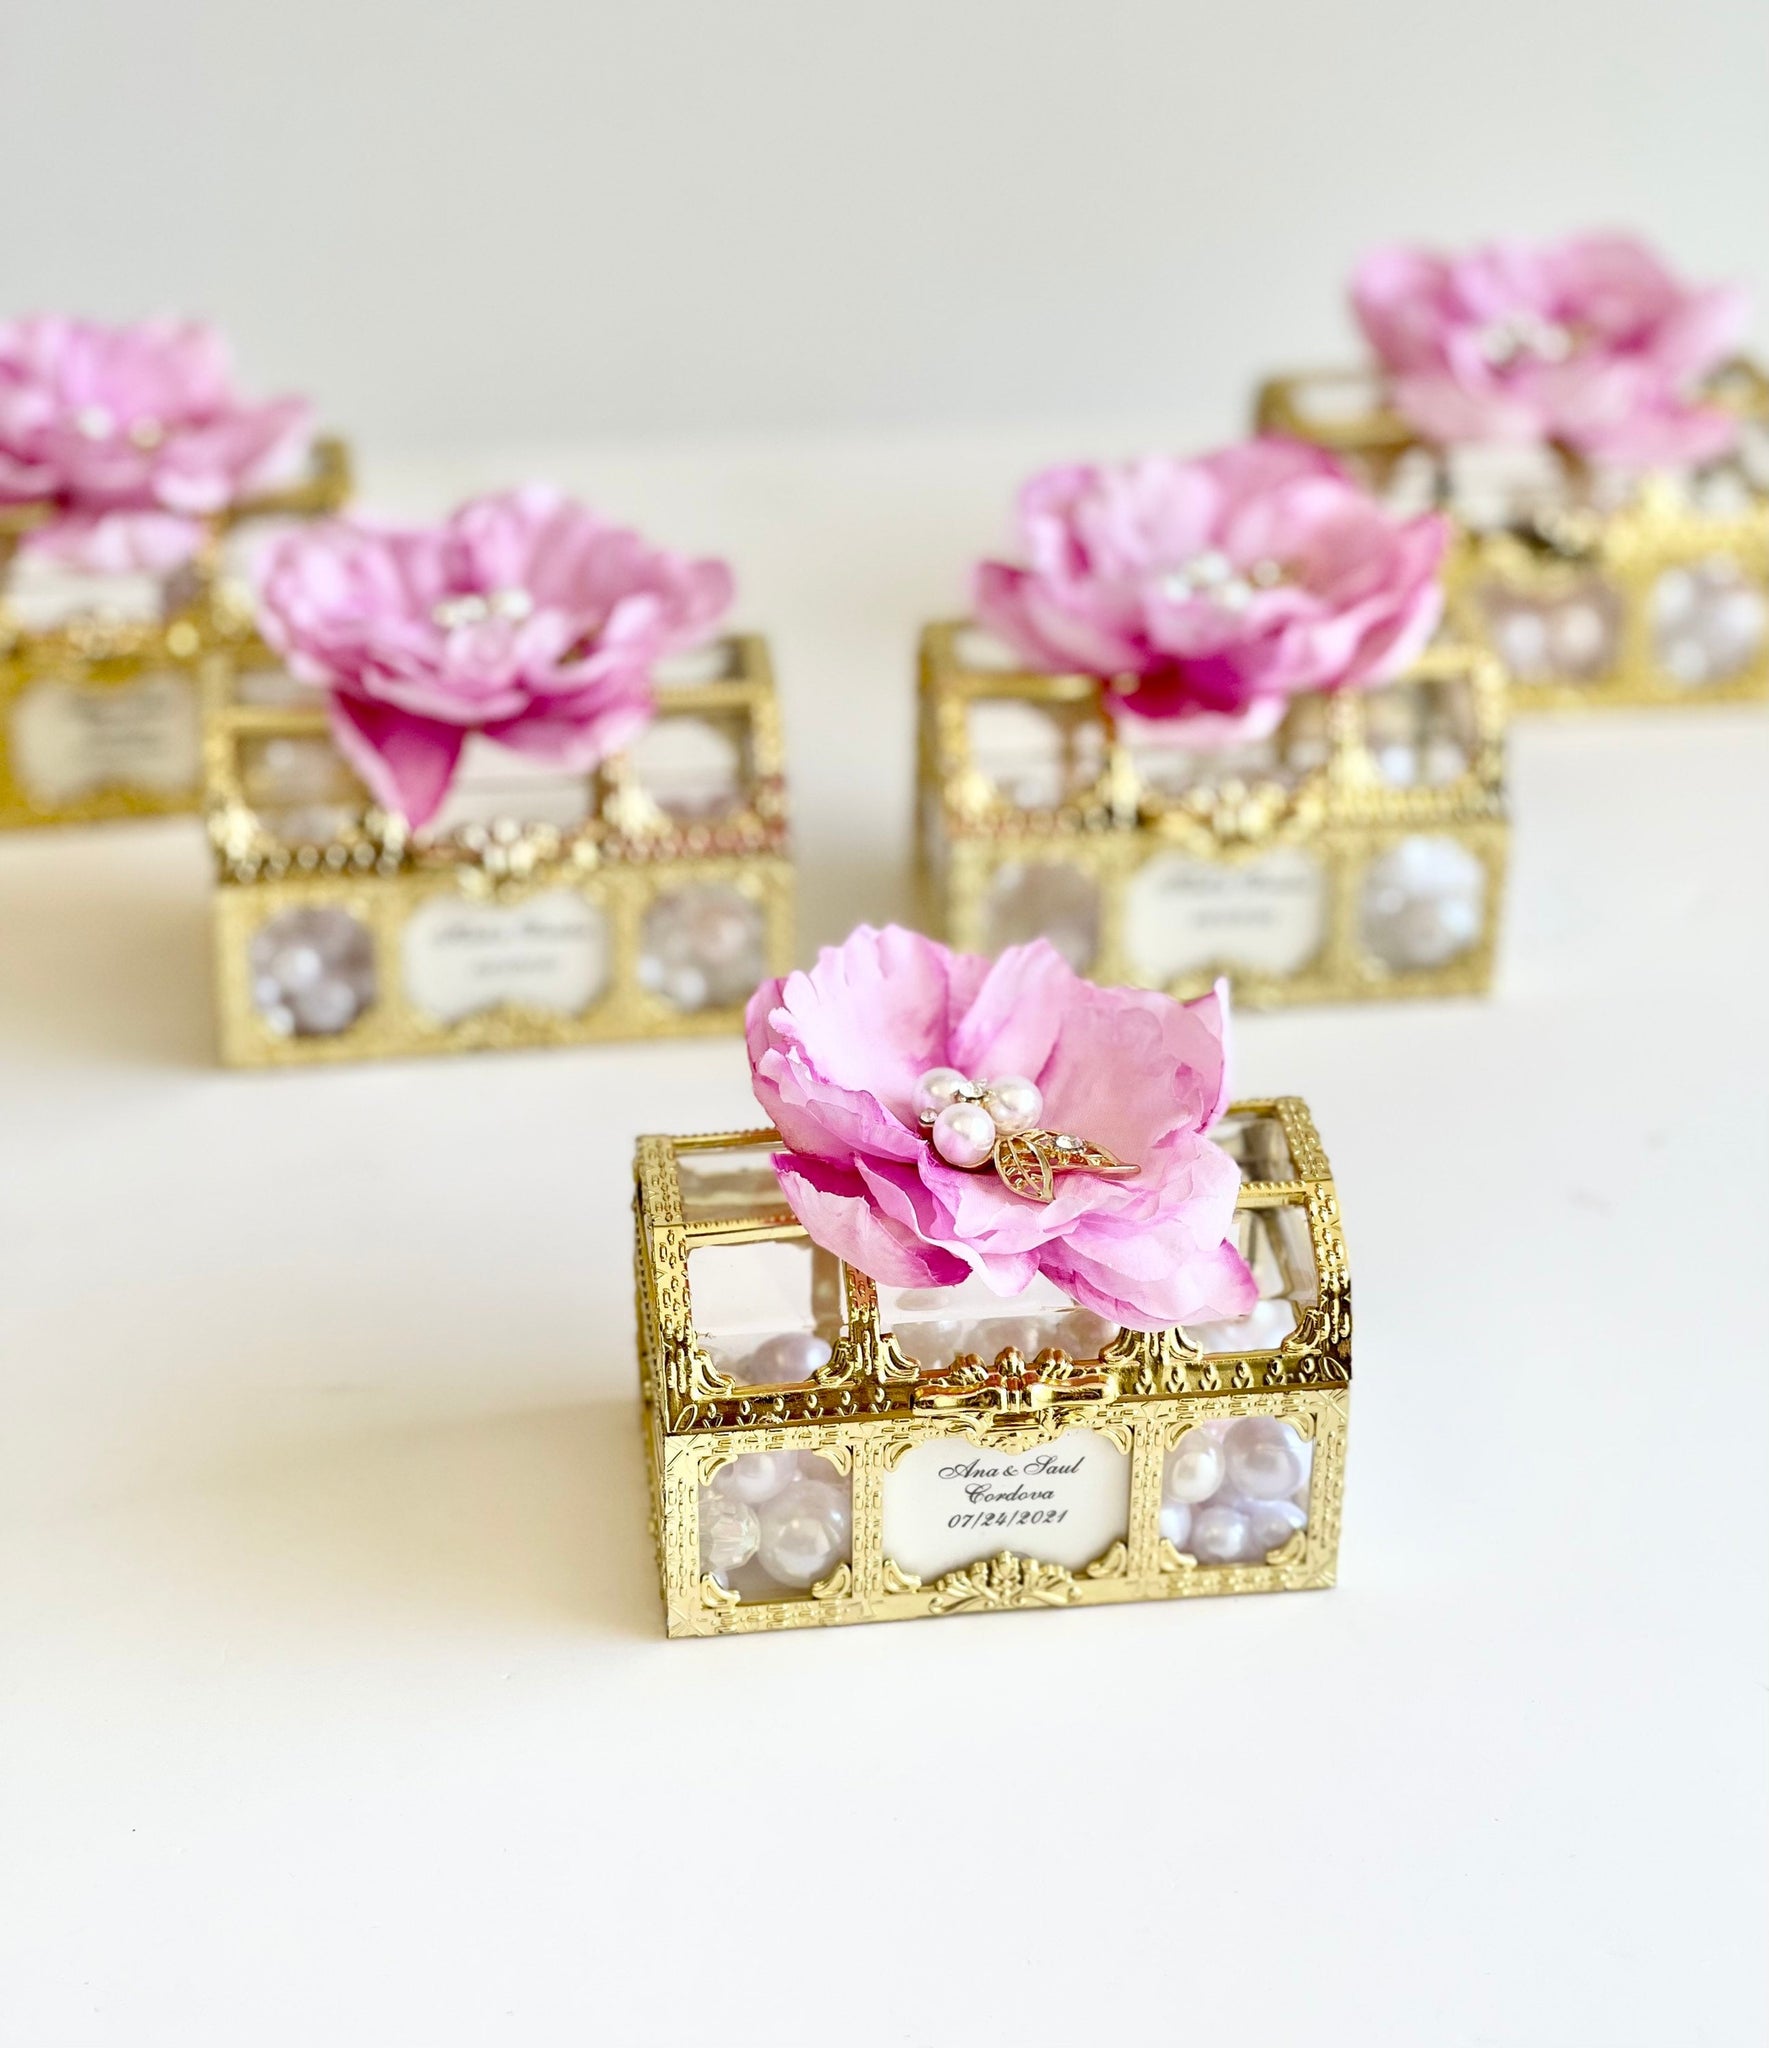 5 pcs Wedding Favors, Favors, Favors Boxes, Wedding Favors for Guests, –  Whiteroomfavors